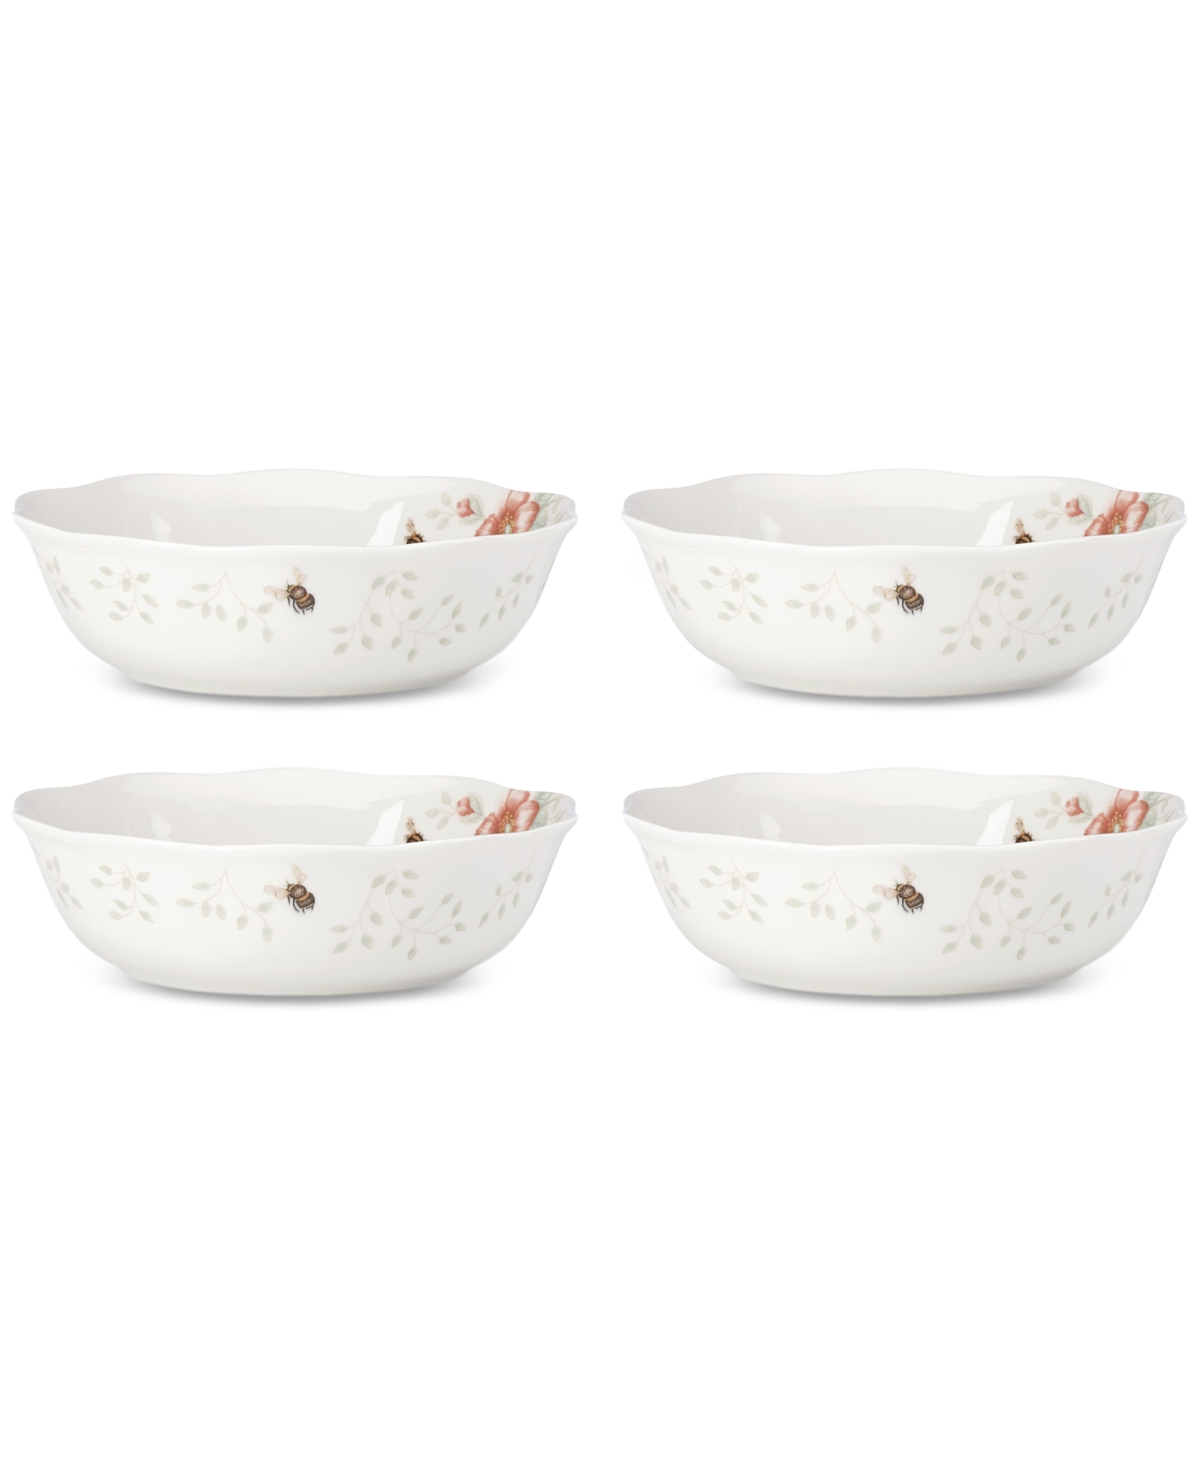 Butterfly Meadow Soup Bowls, Set of 4 - Multi And White